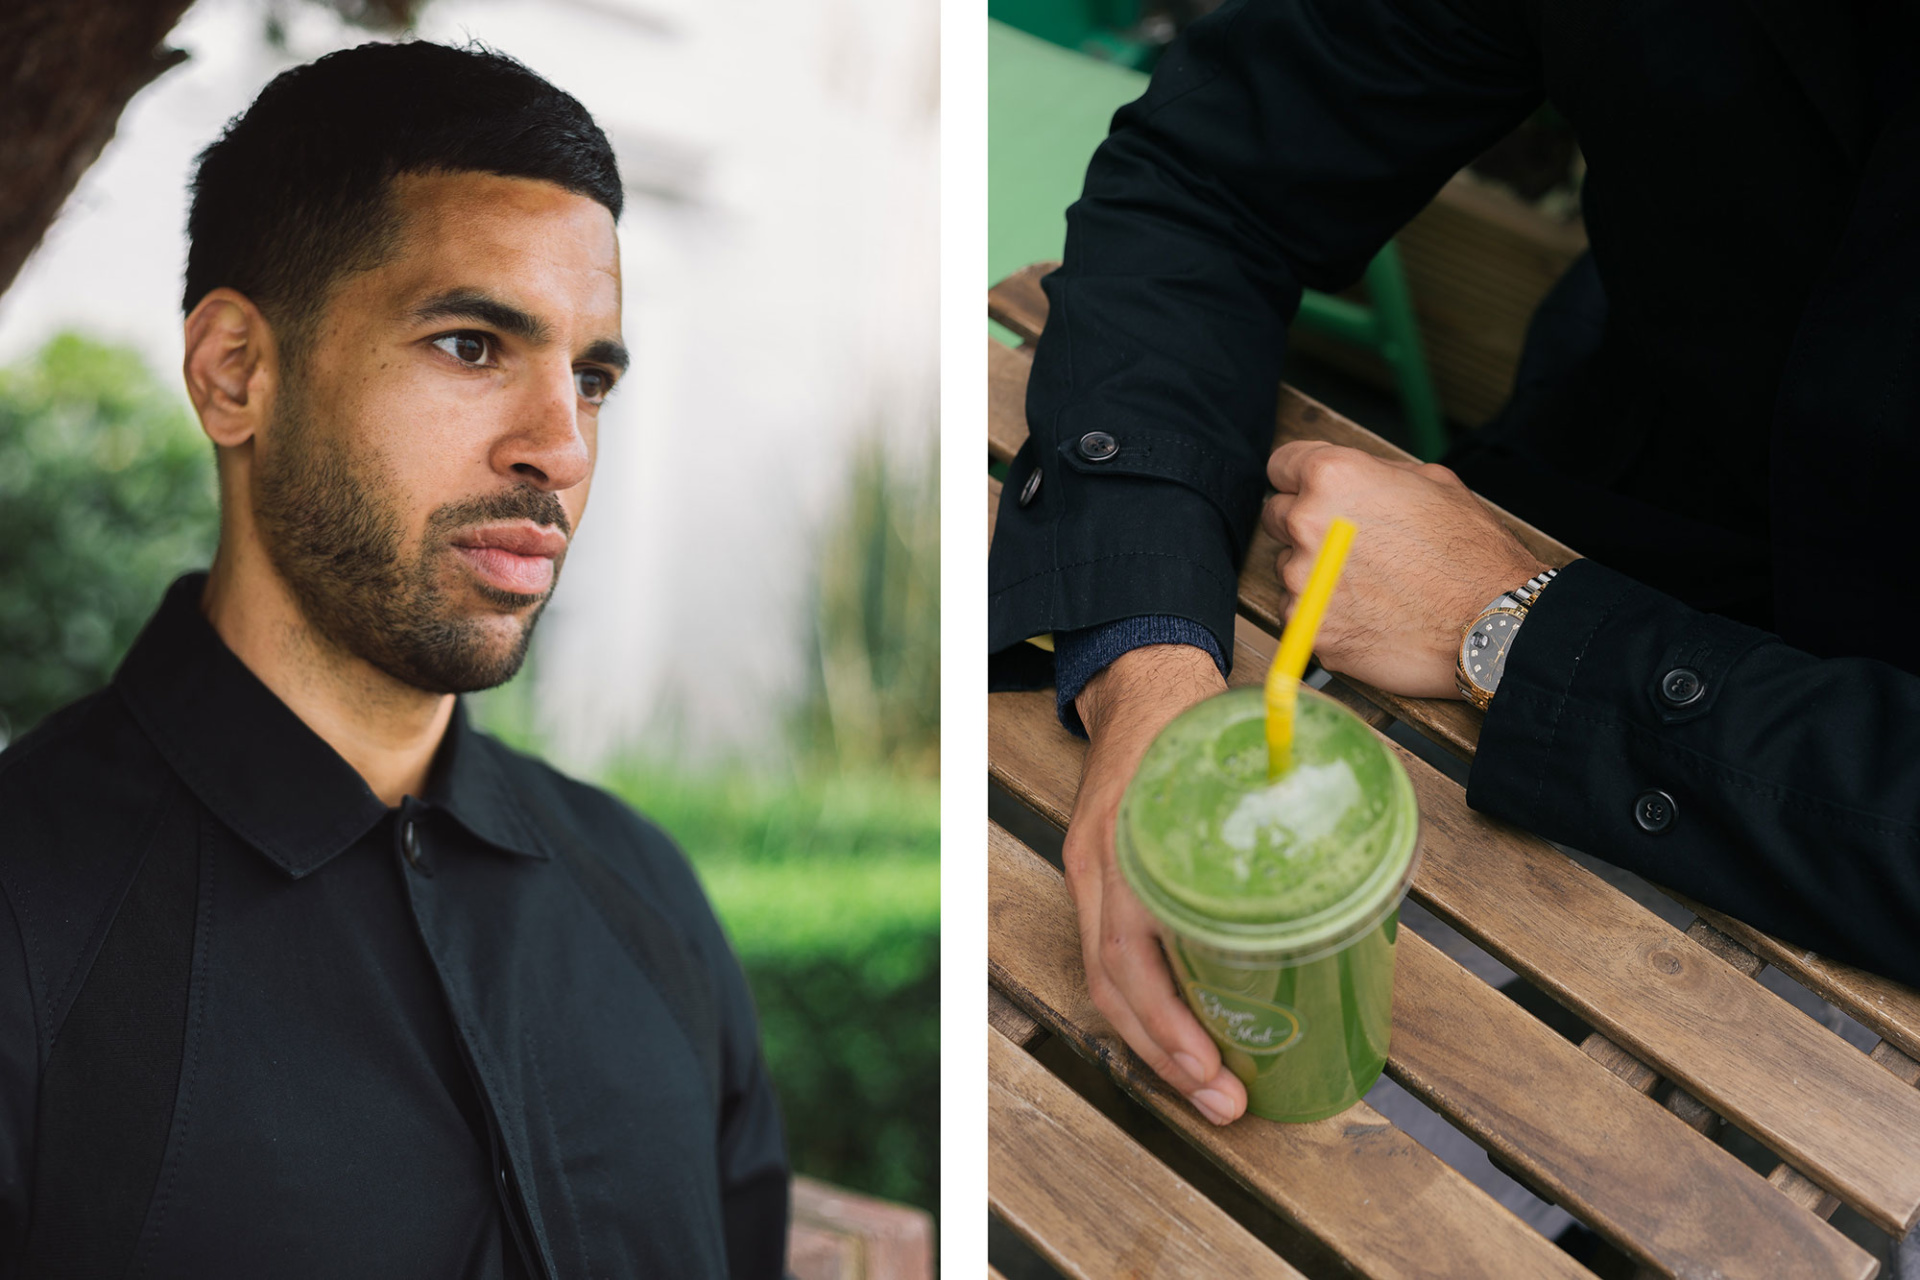 Fortytude promotional shots- one shows a model in a black jacket, the other a green smoothie. Graphic design produced by Barefaced Studios, design agency based in Islington, North London.